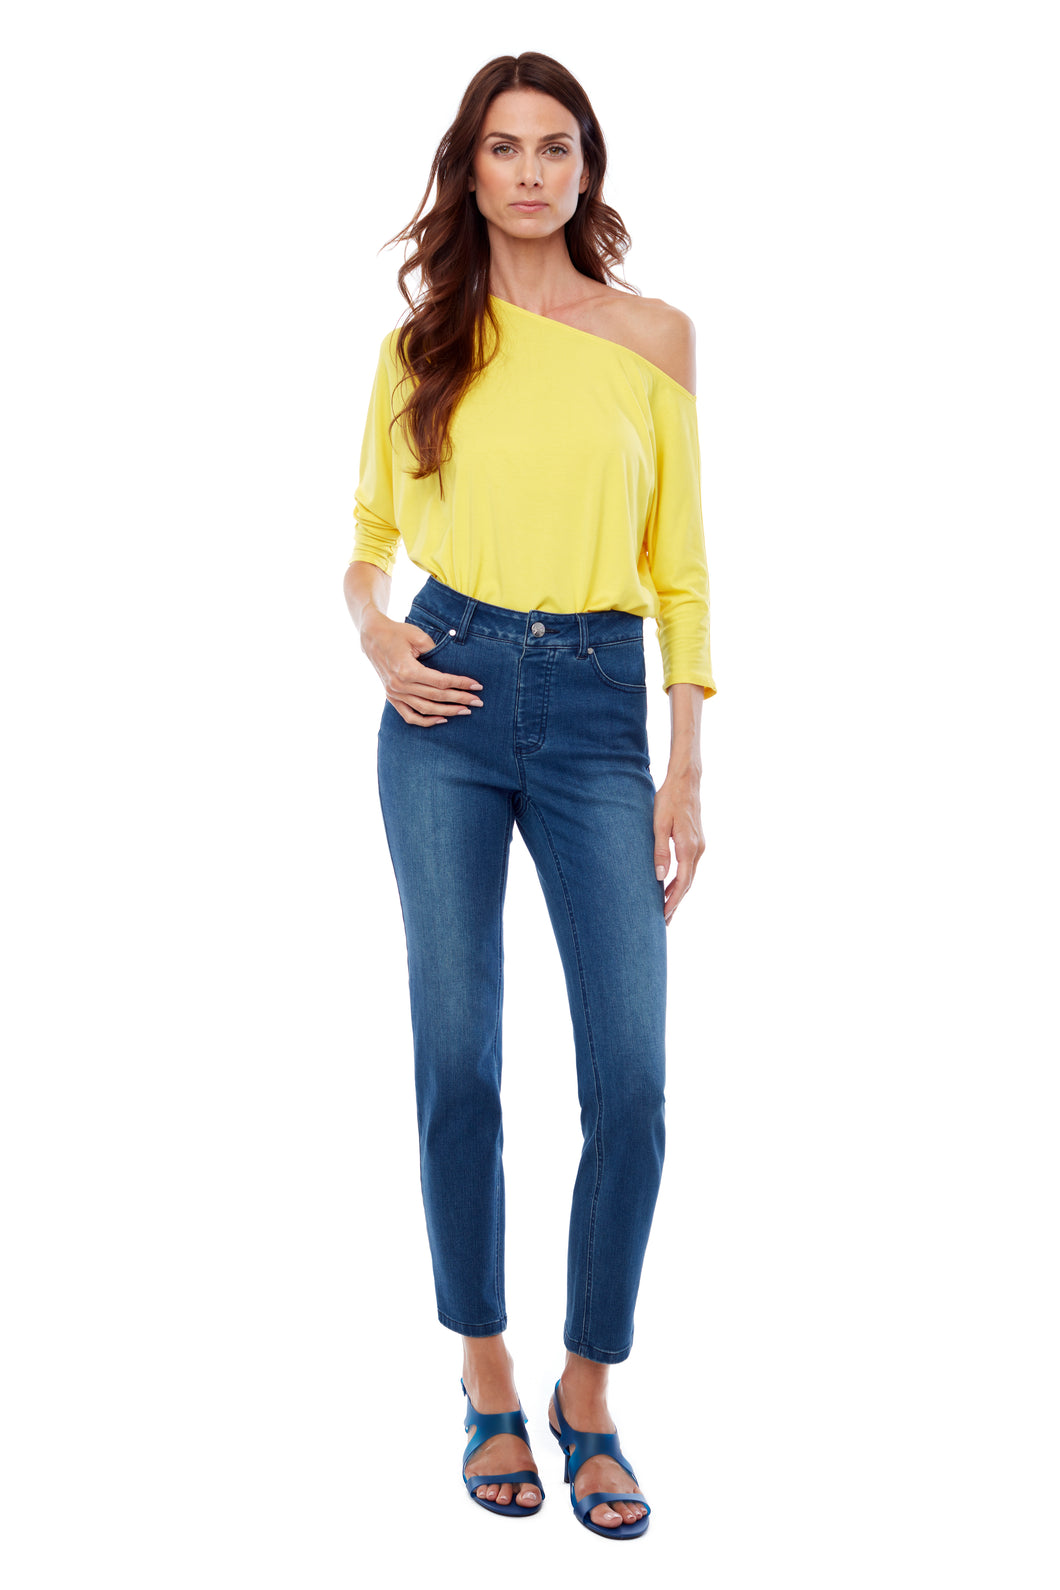 UP! Slim Fit Pull On Body-Shaping Denim Ankle Pant in Medium Wash, Light Wash or Black